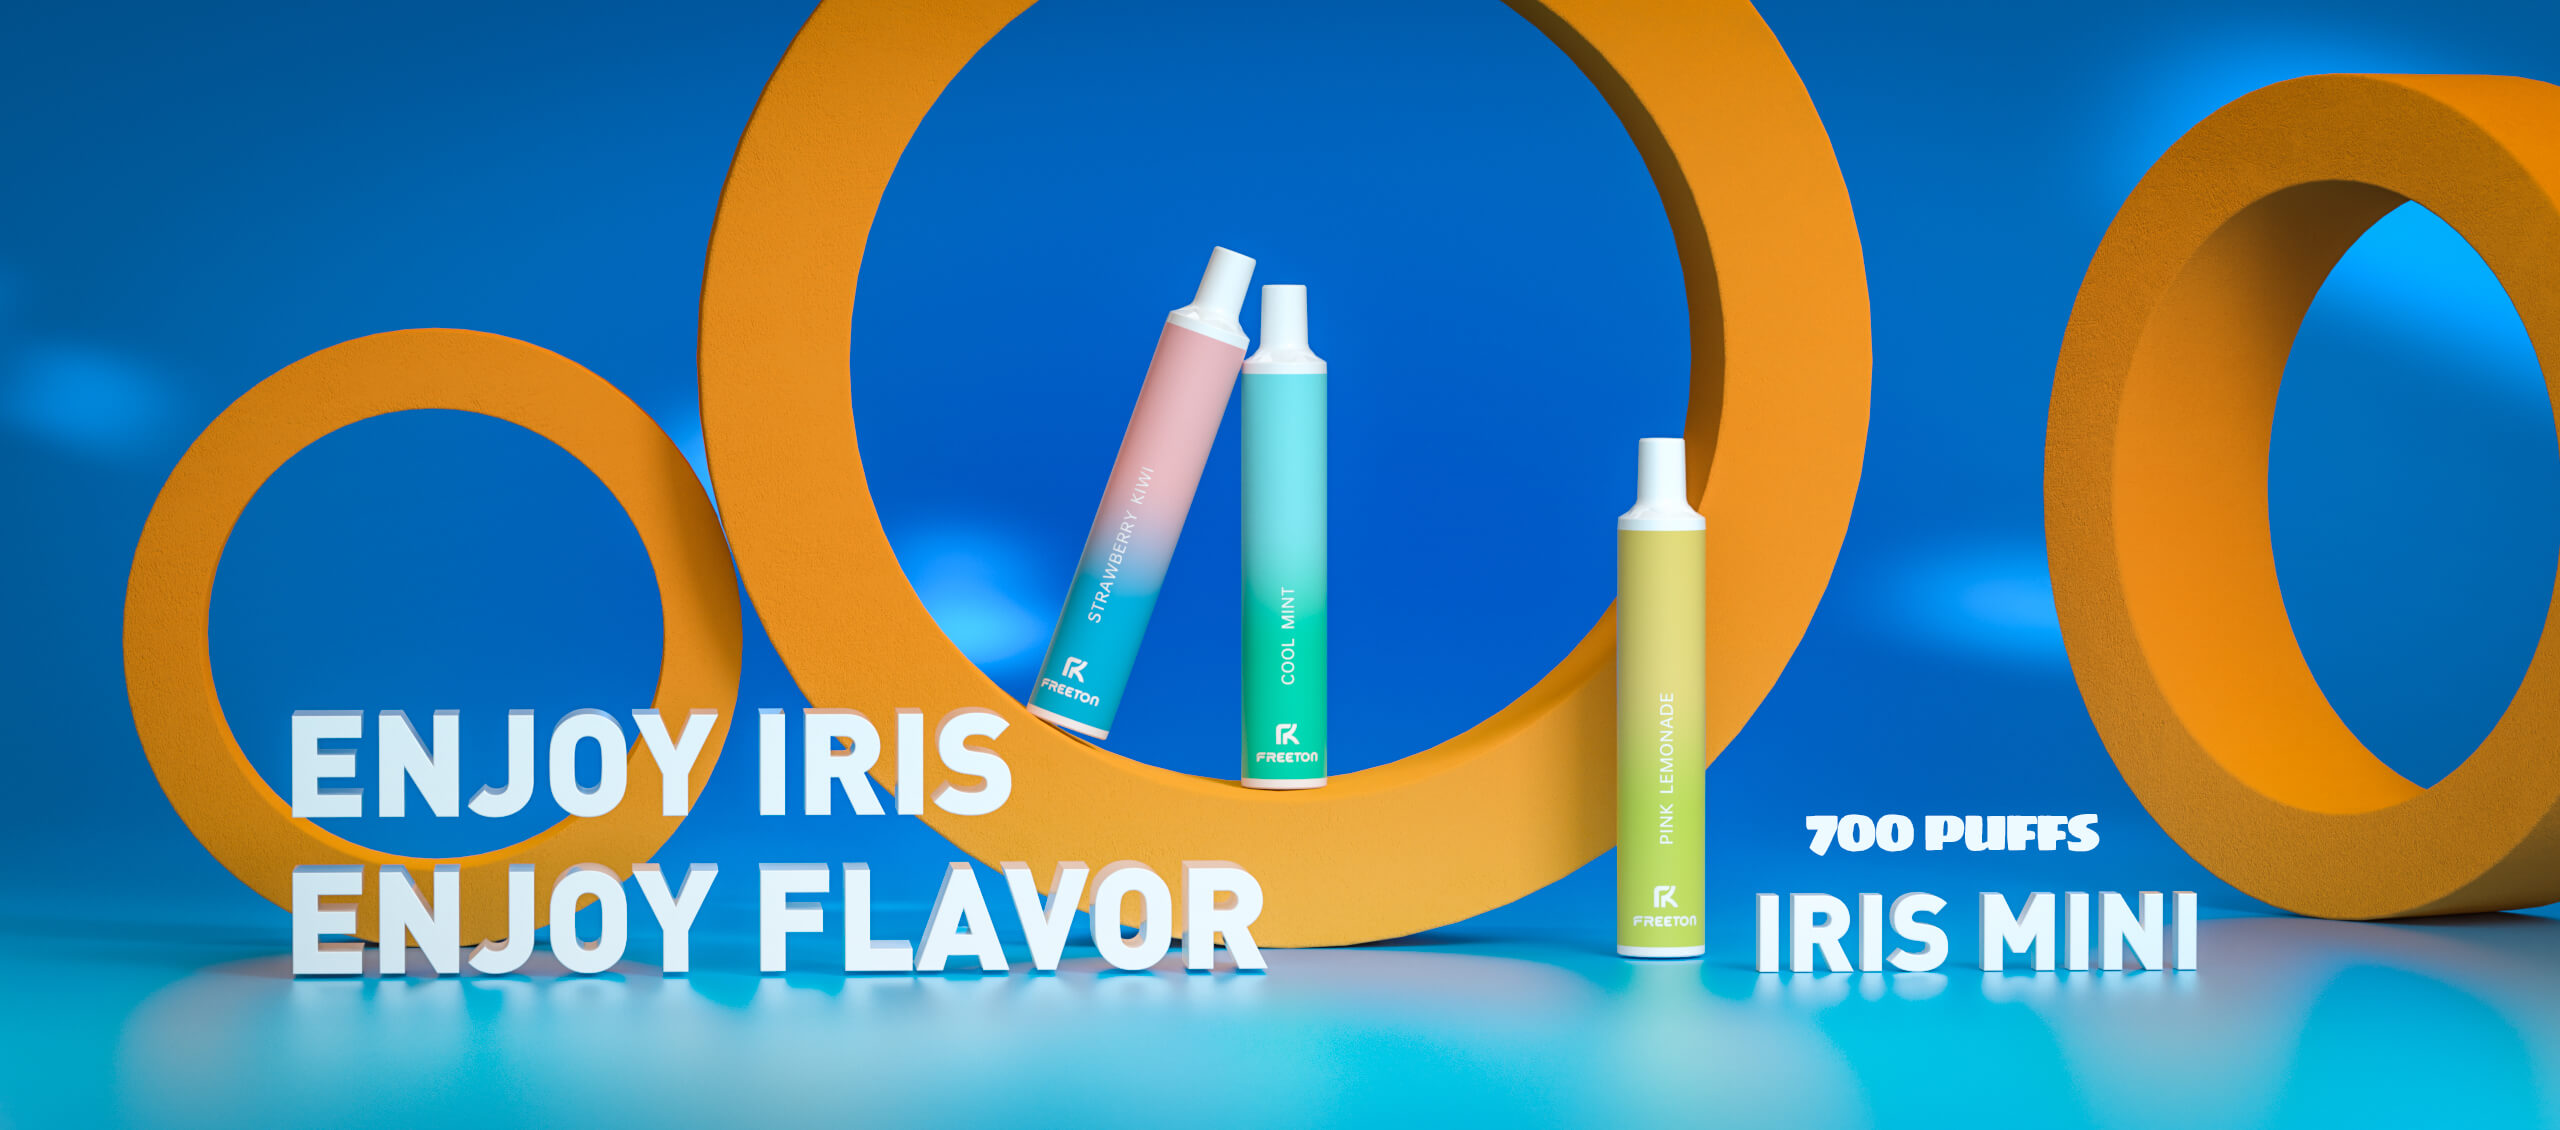 IRIS Mini - a Compact, Portable and Simply Satisfying Vaping Experience